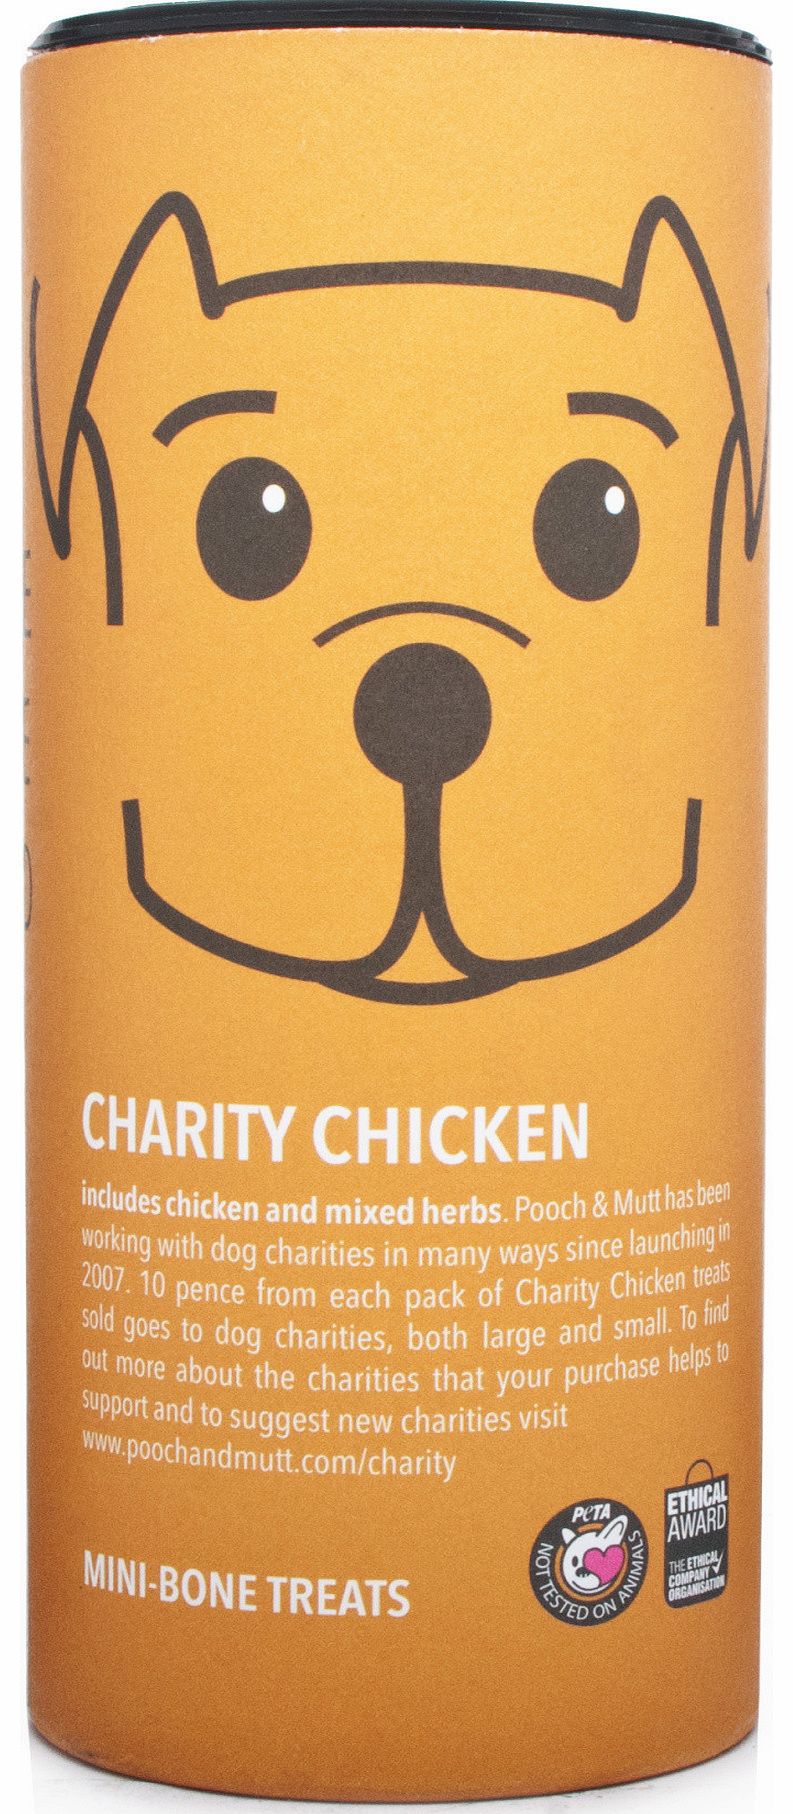 Charity Chicken treats for dogs